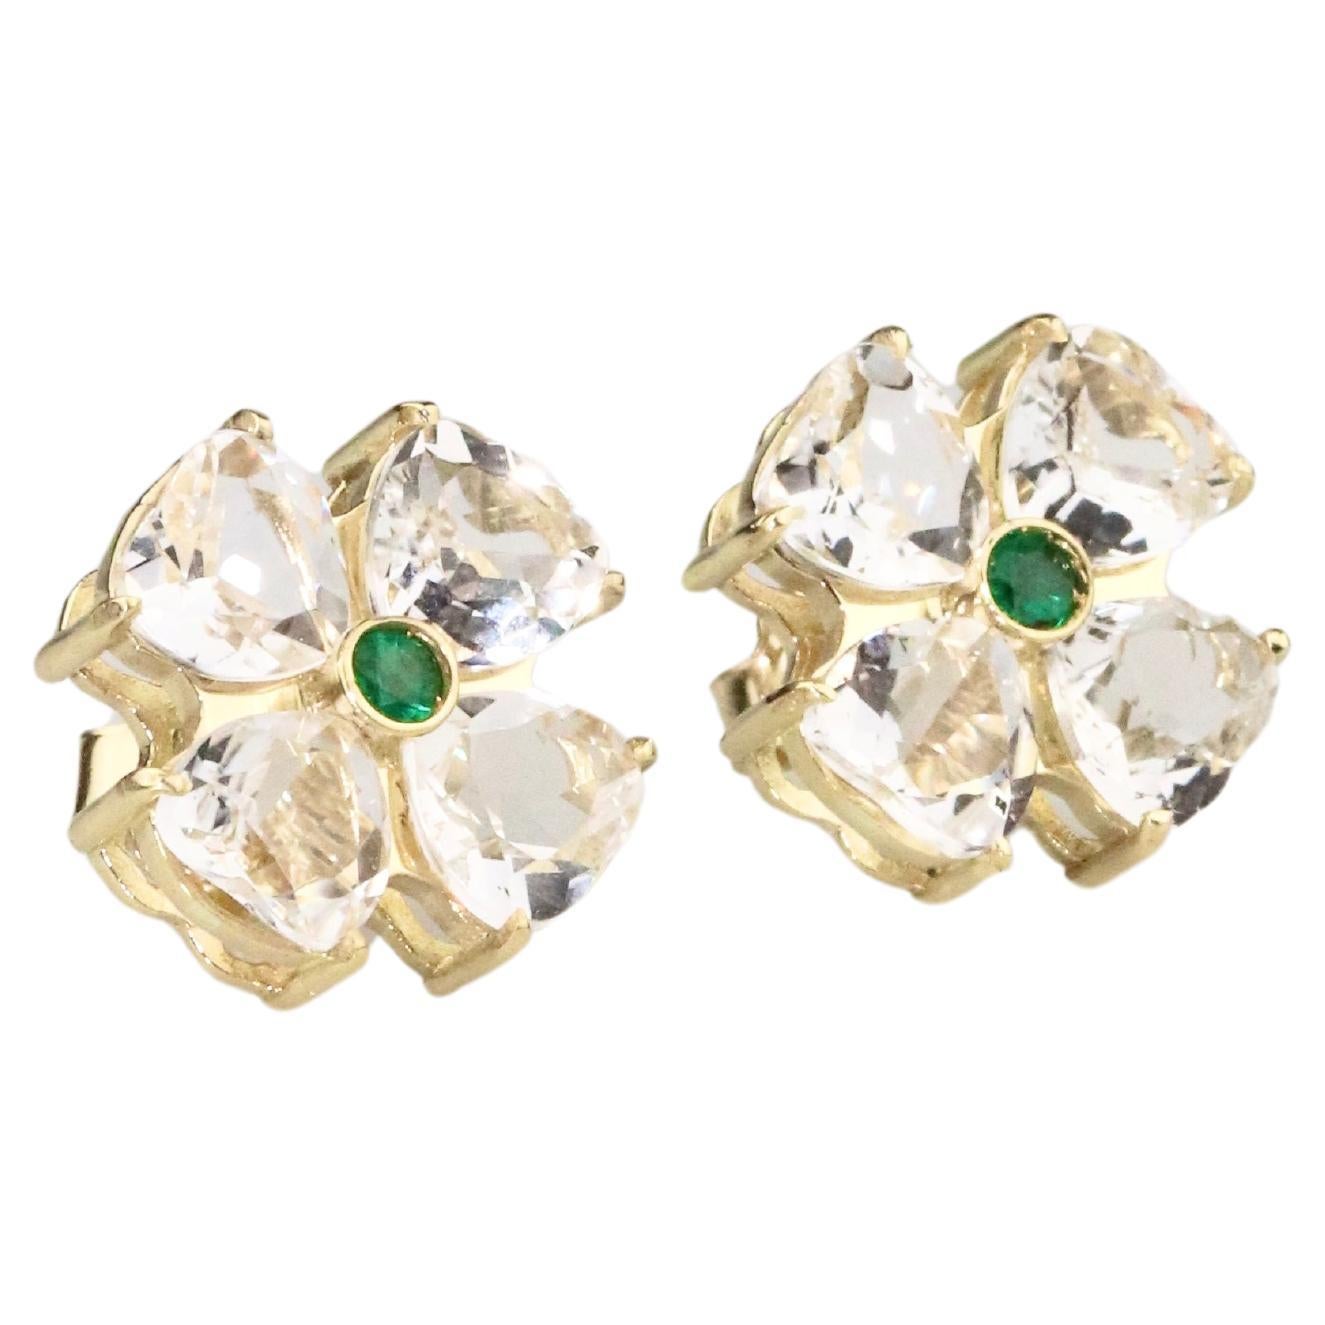 Flower Earrings & Emerald - 18K Solid Yellow Gold For Sale